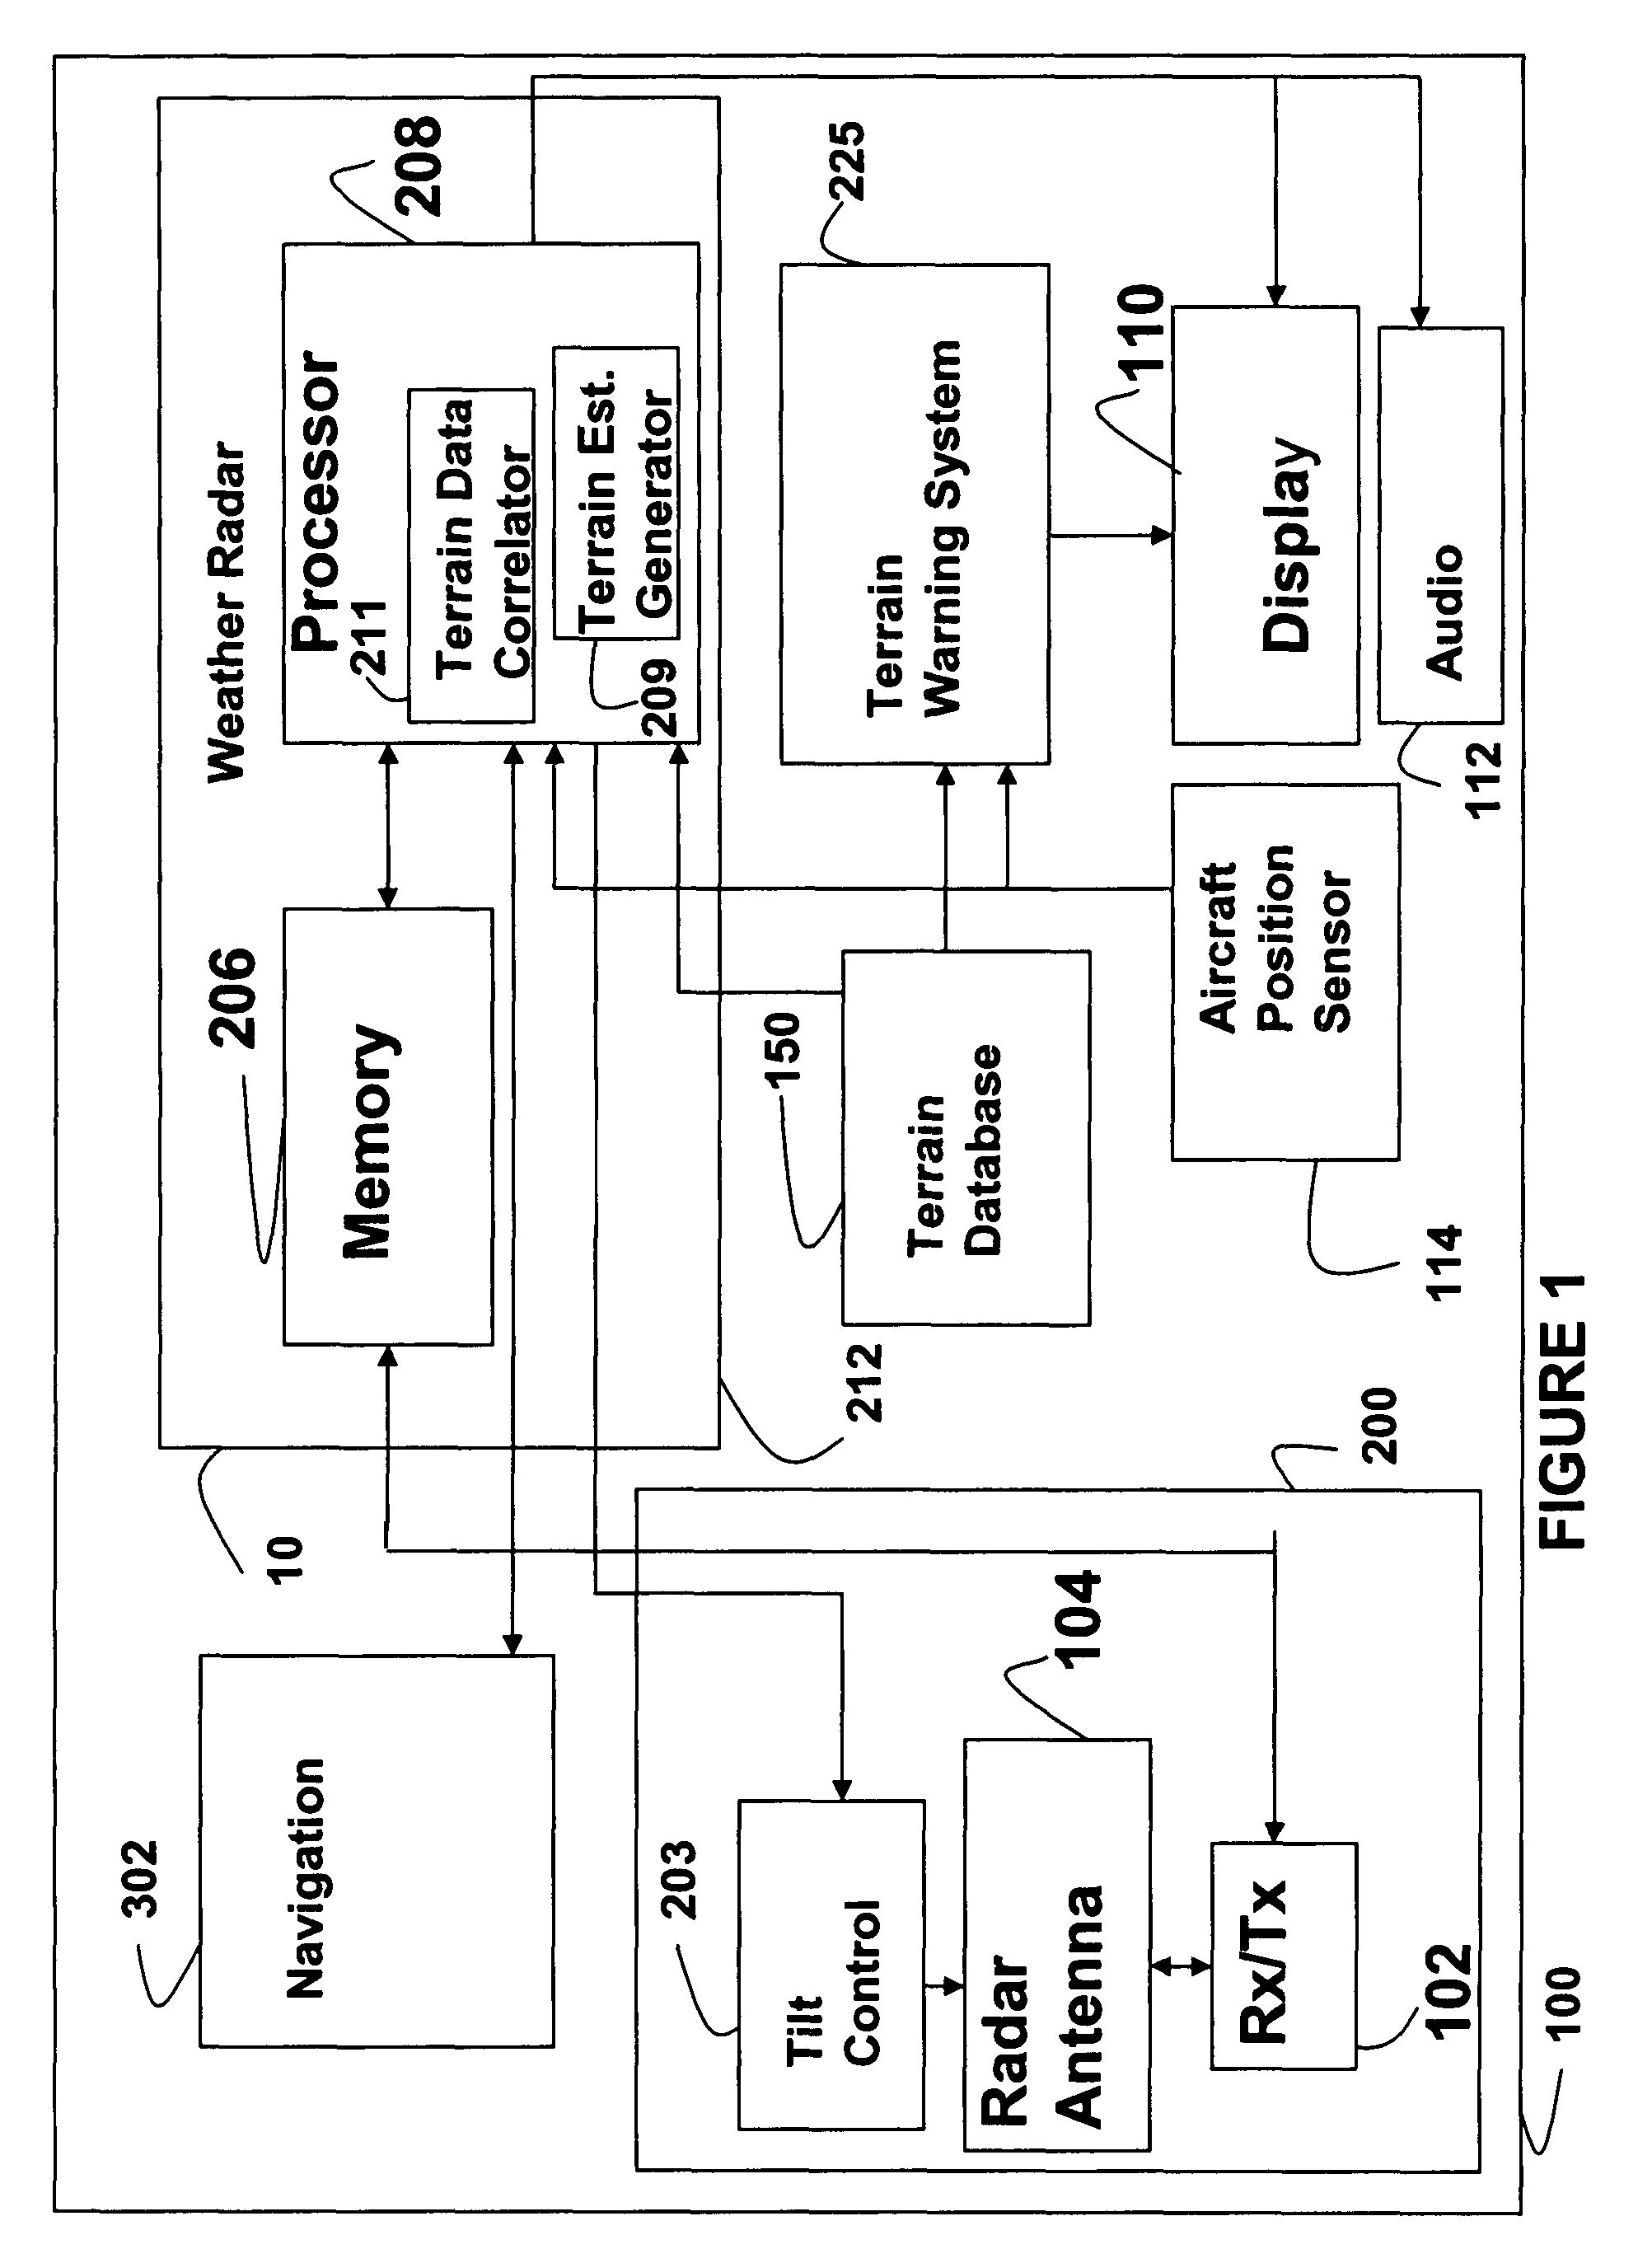 System and method for a terrain database and/or position validation